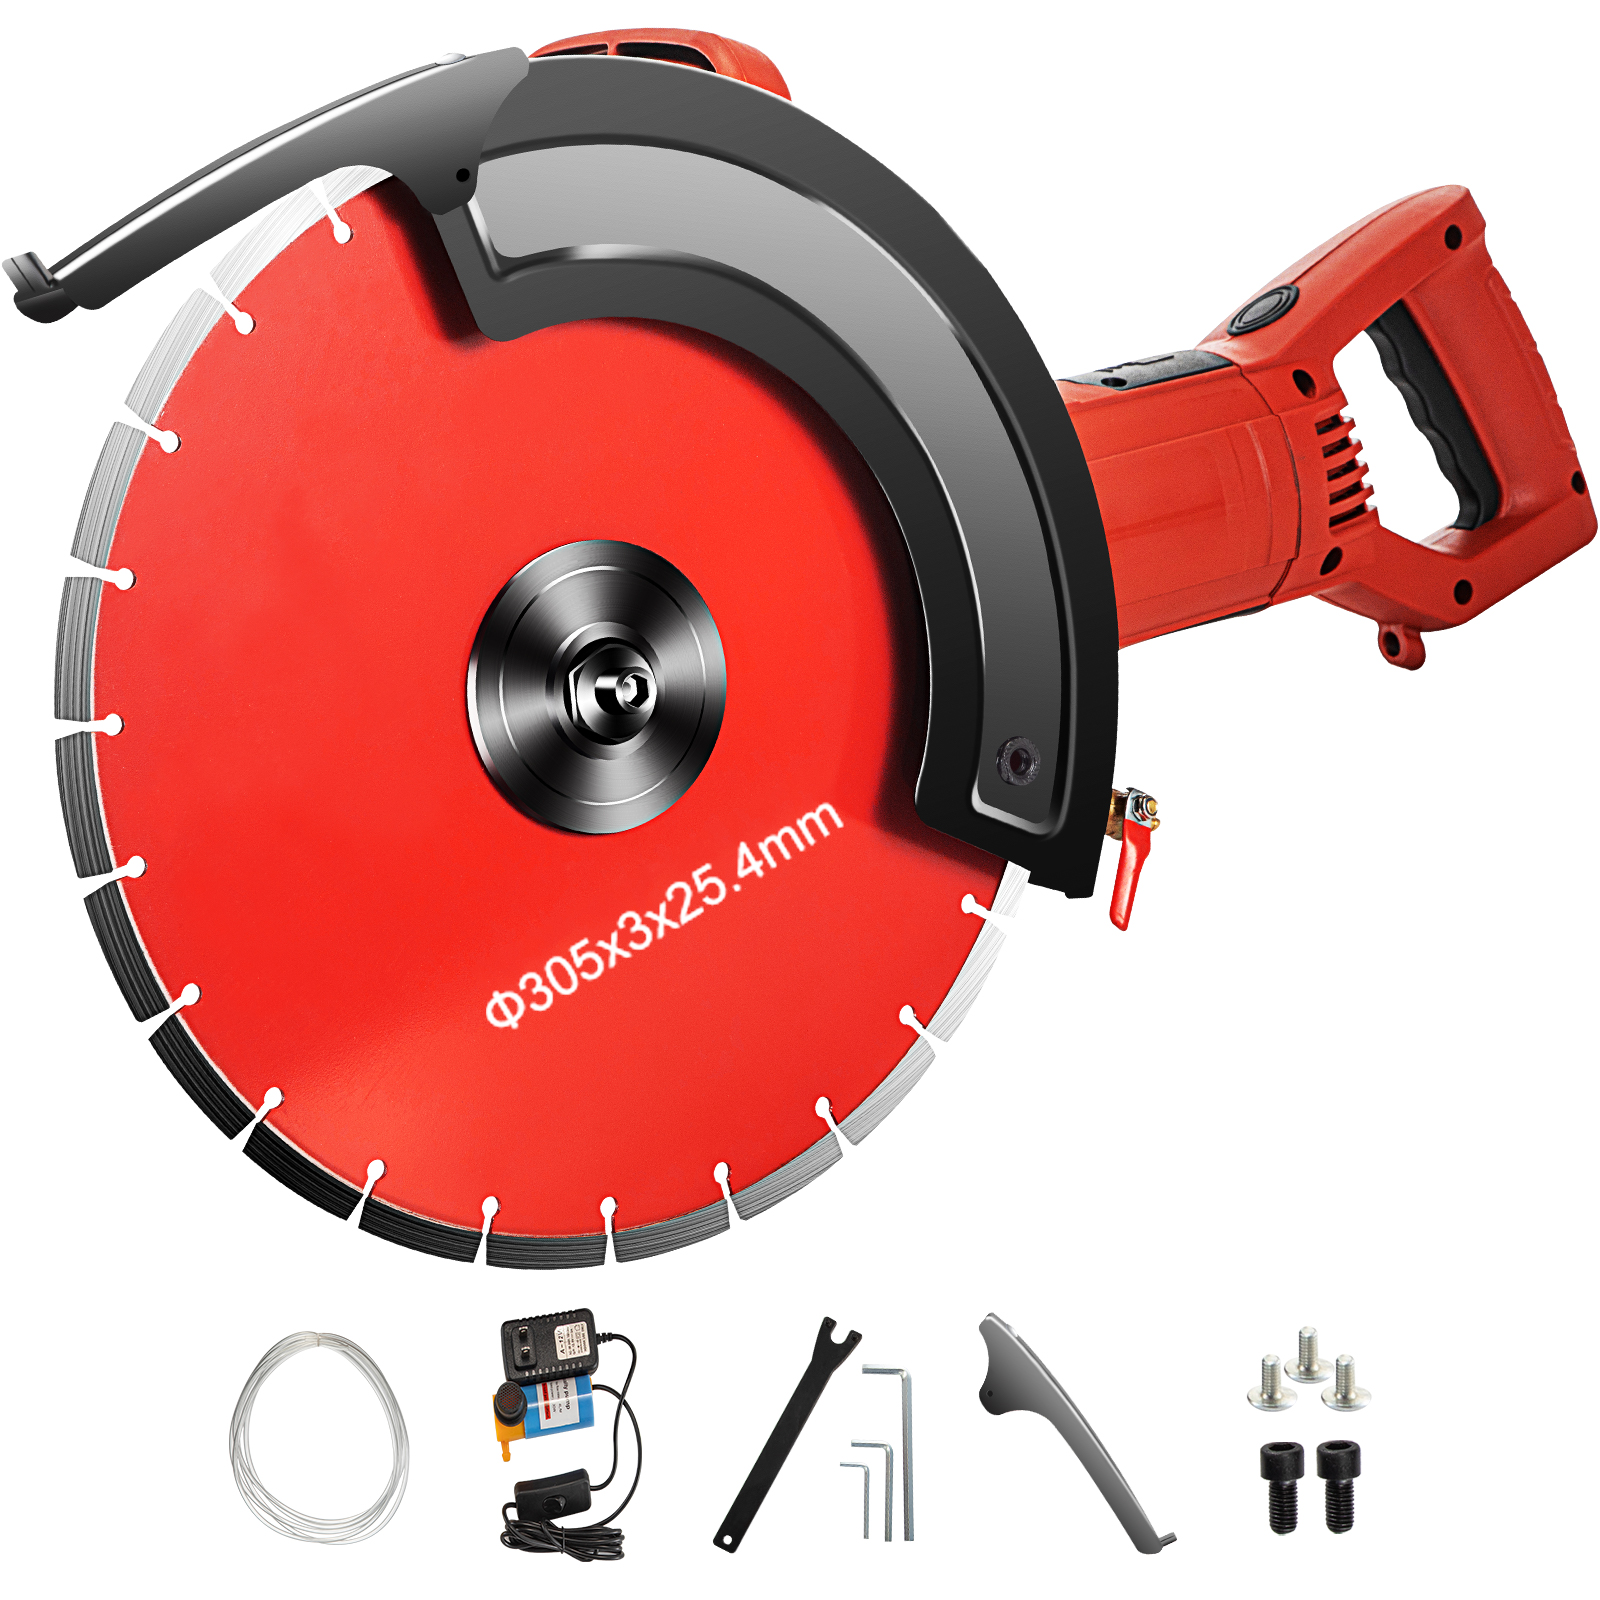 VEVOR Electric Concrete Saw, 16 in, 3200 W 15 A Motor Circular Saw Cutter  with Max.